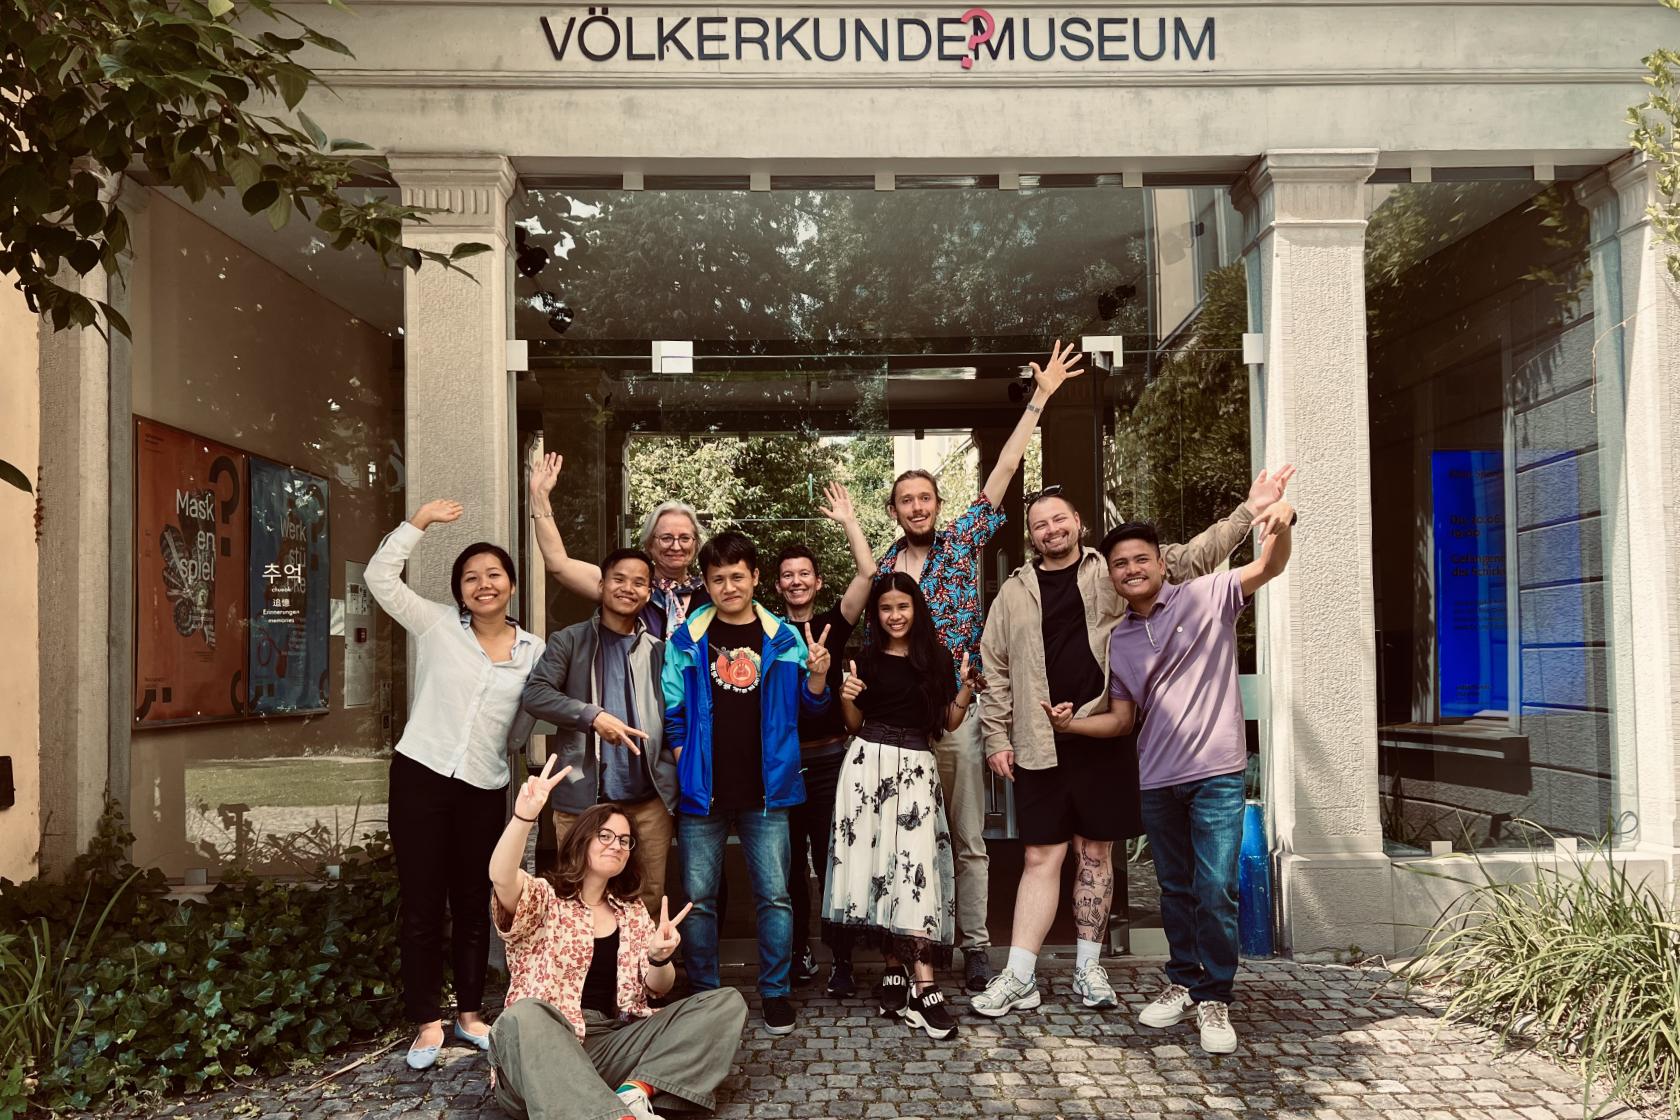 The project team in front of the museum entrance (left to right): Zing Ruat Par Bawm, Ana Riciard, Thongpong Mro, Mareile Flitsch, Ralong Khumi, Rebekka Sutter, Zoneikim Pangkhua, Thierry Schneeberger, Amir Mommartz and U Shamong Kheyang. Sheila Honegger is not in the picture.